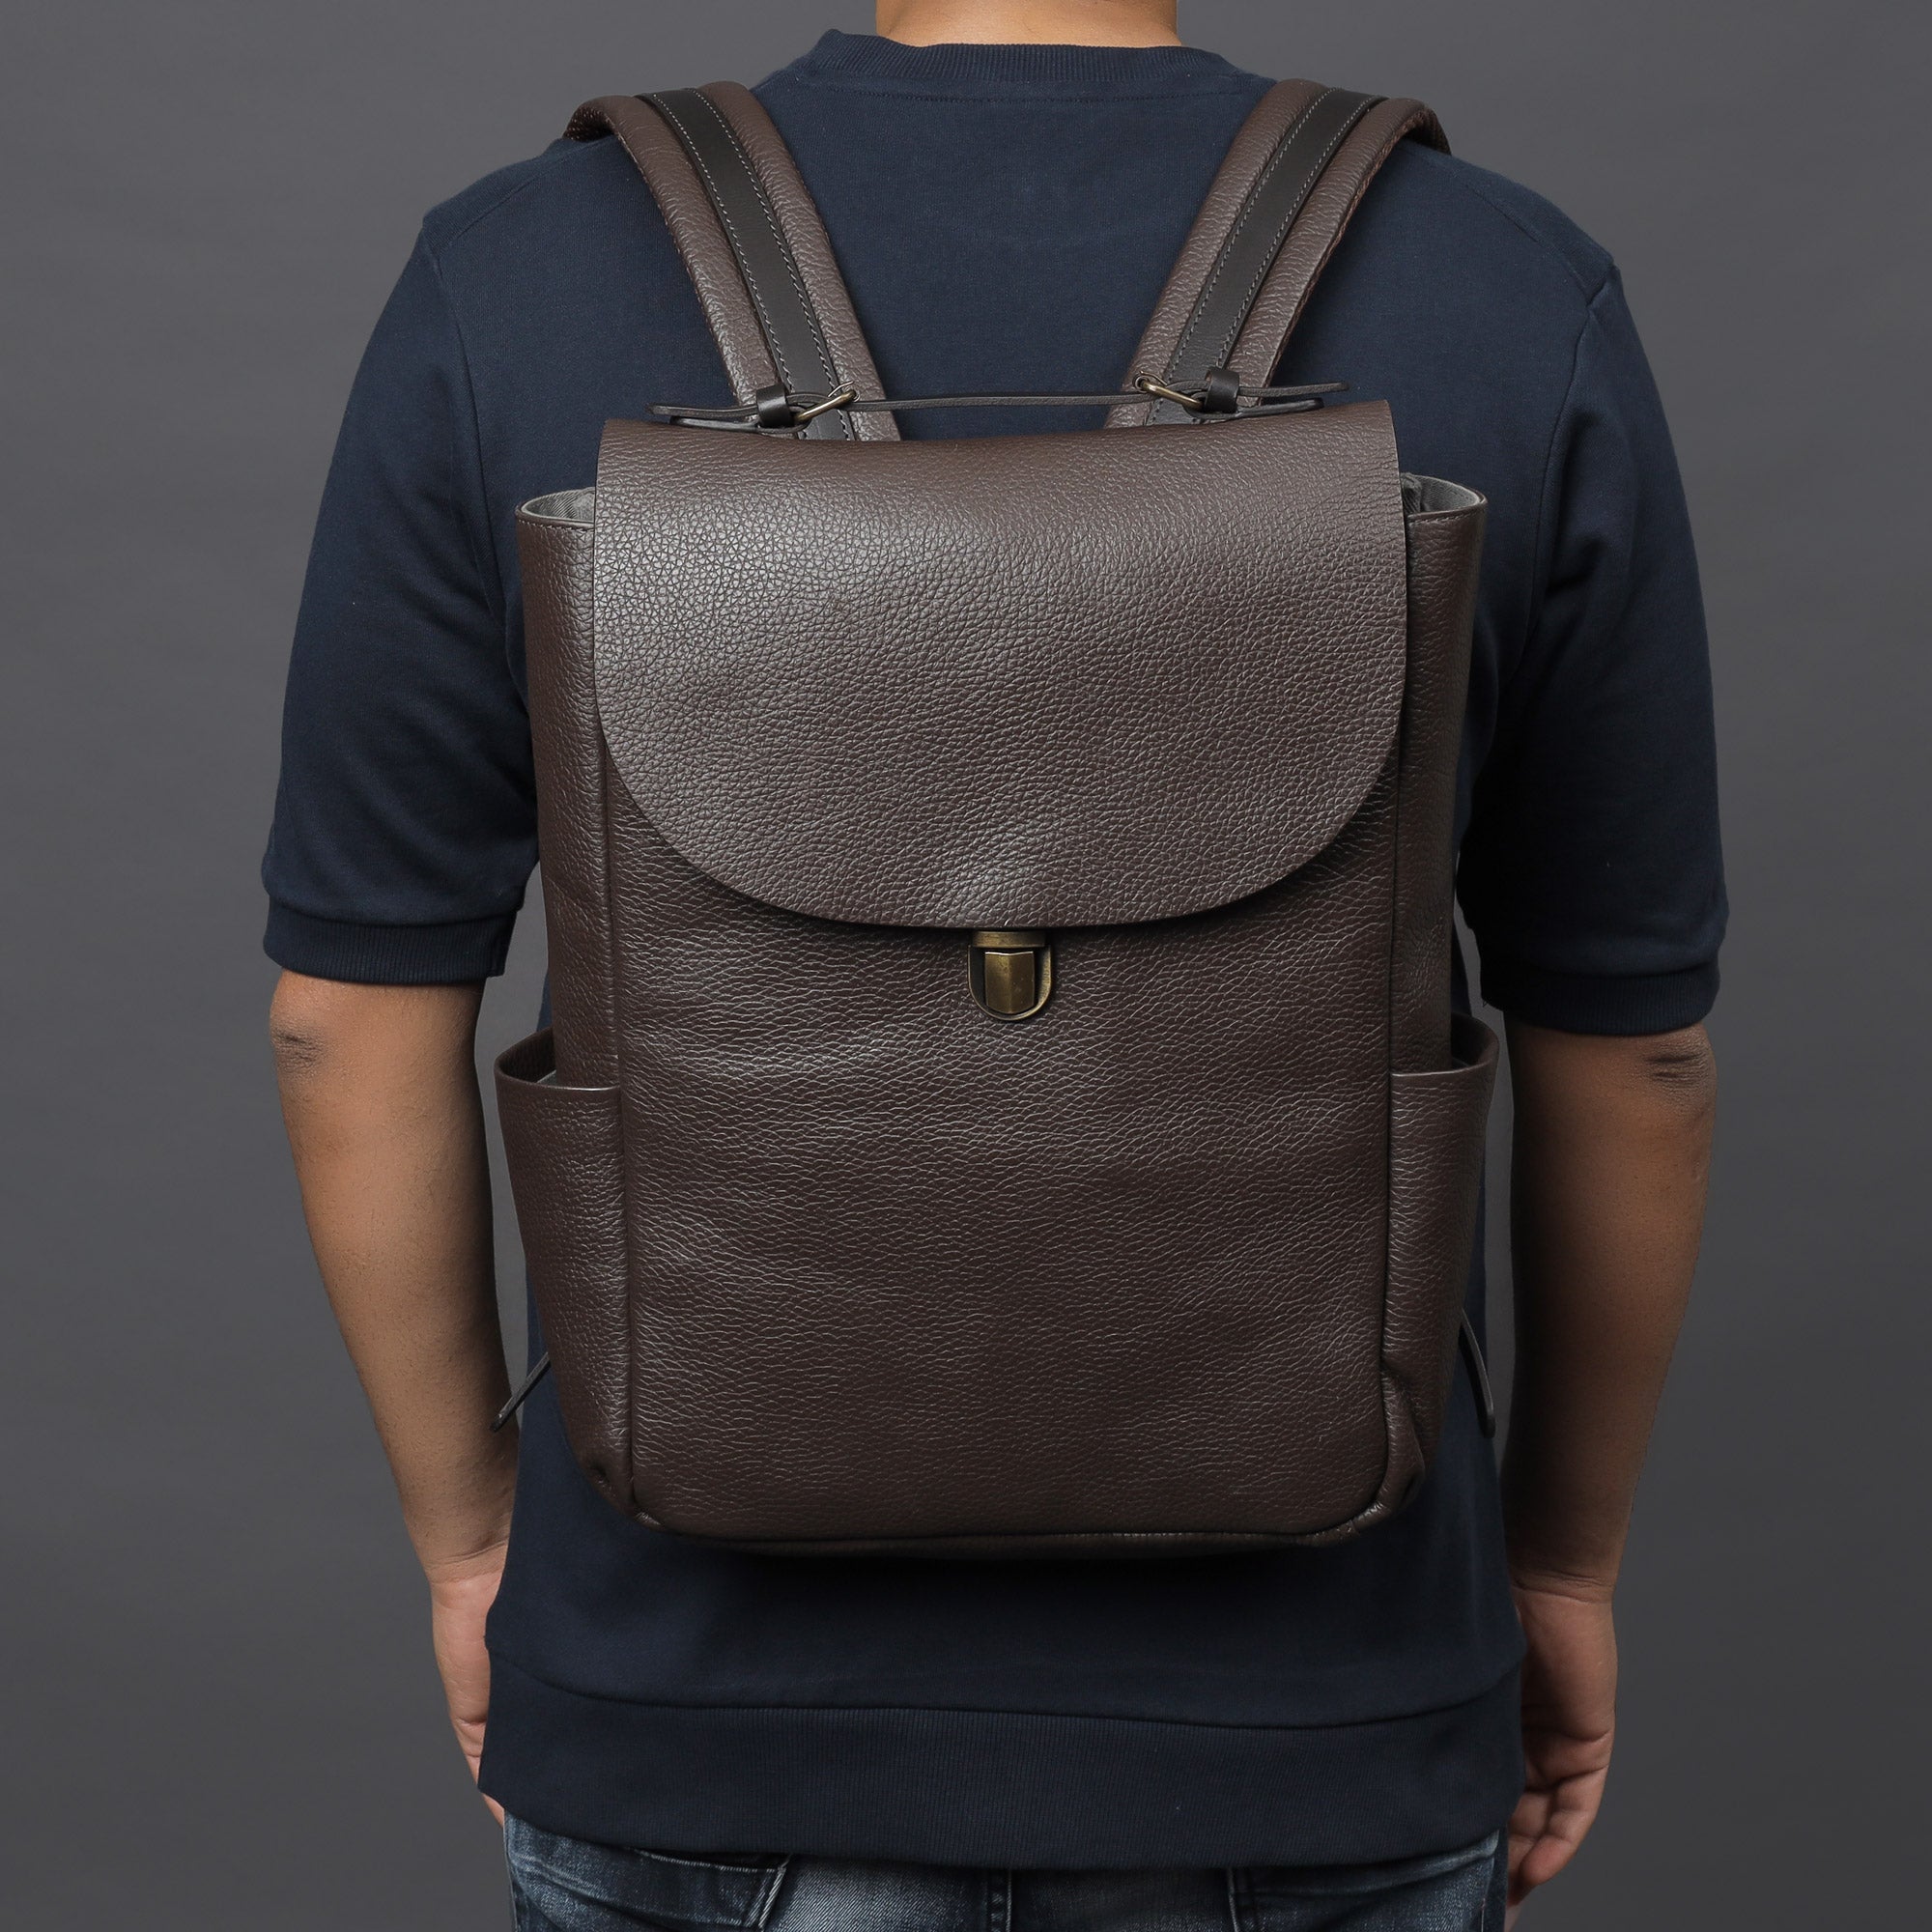 London Leather Backpack